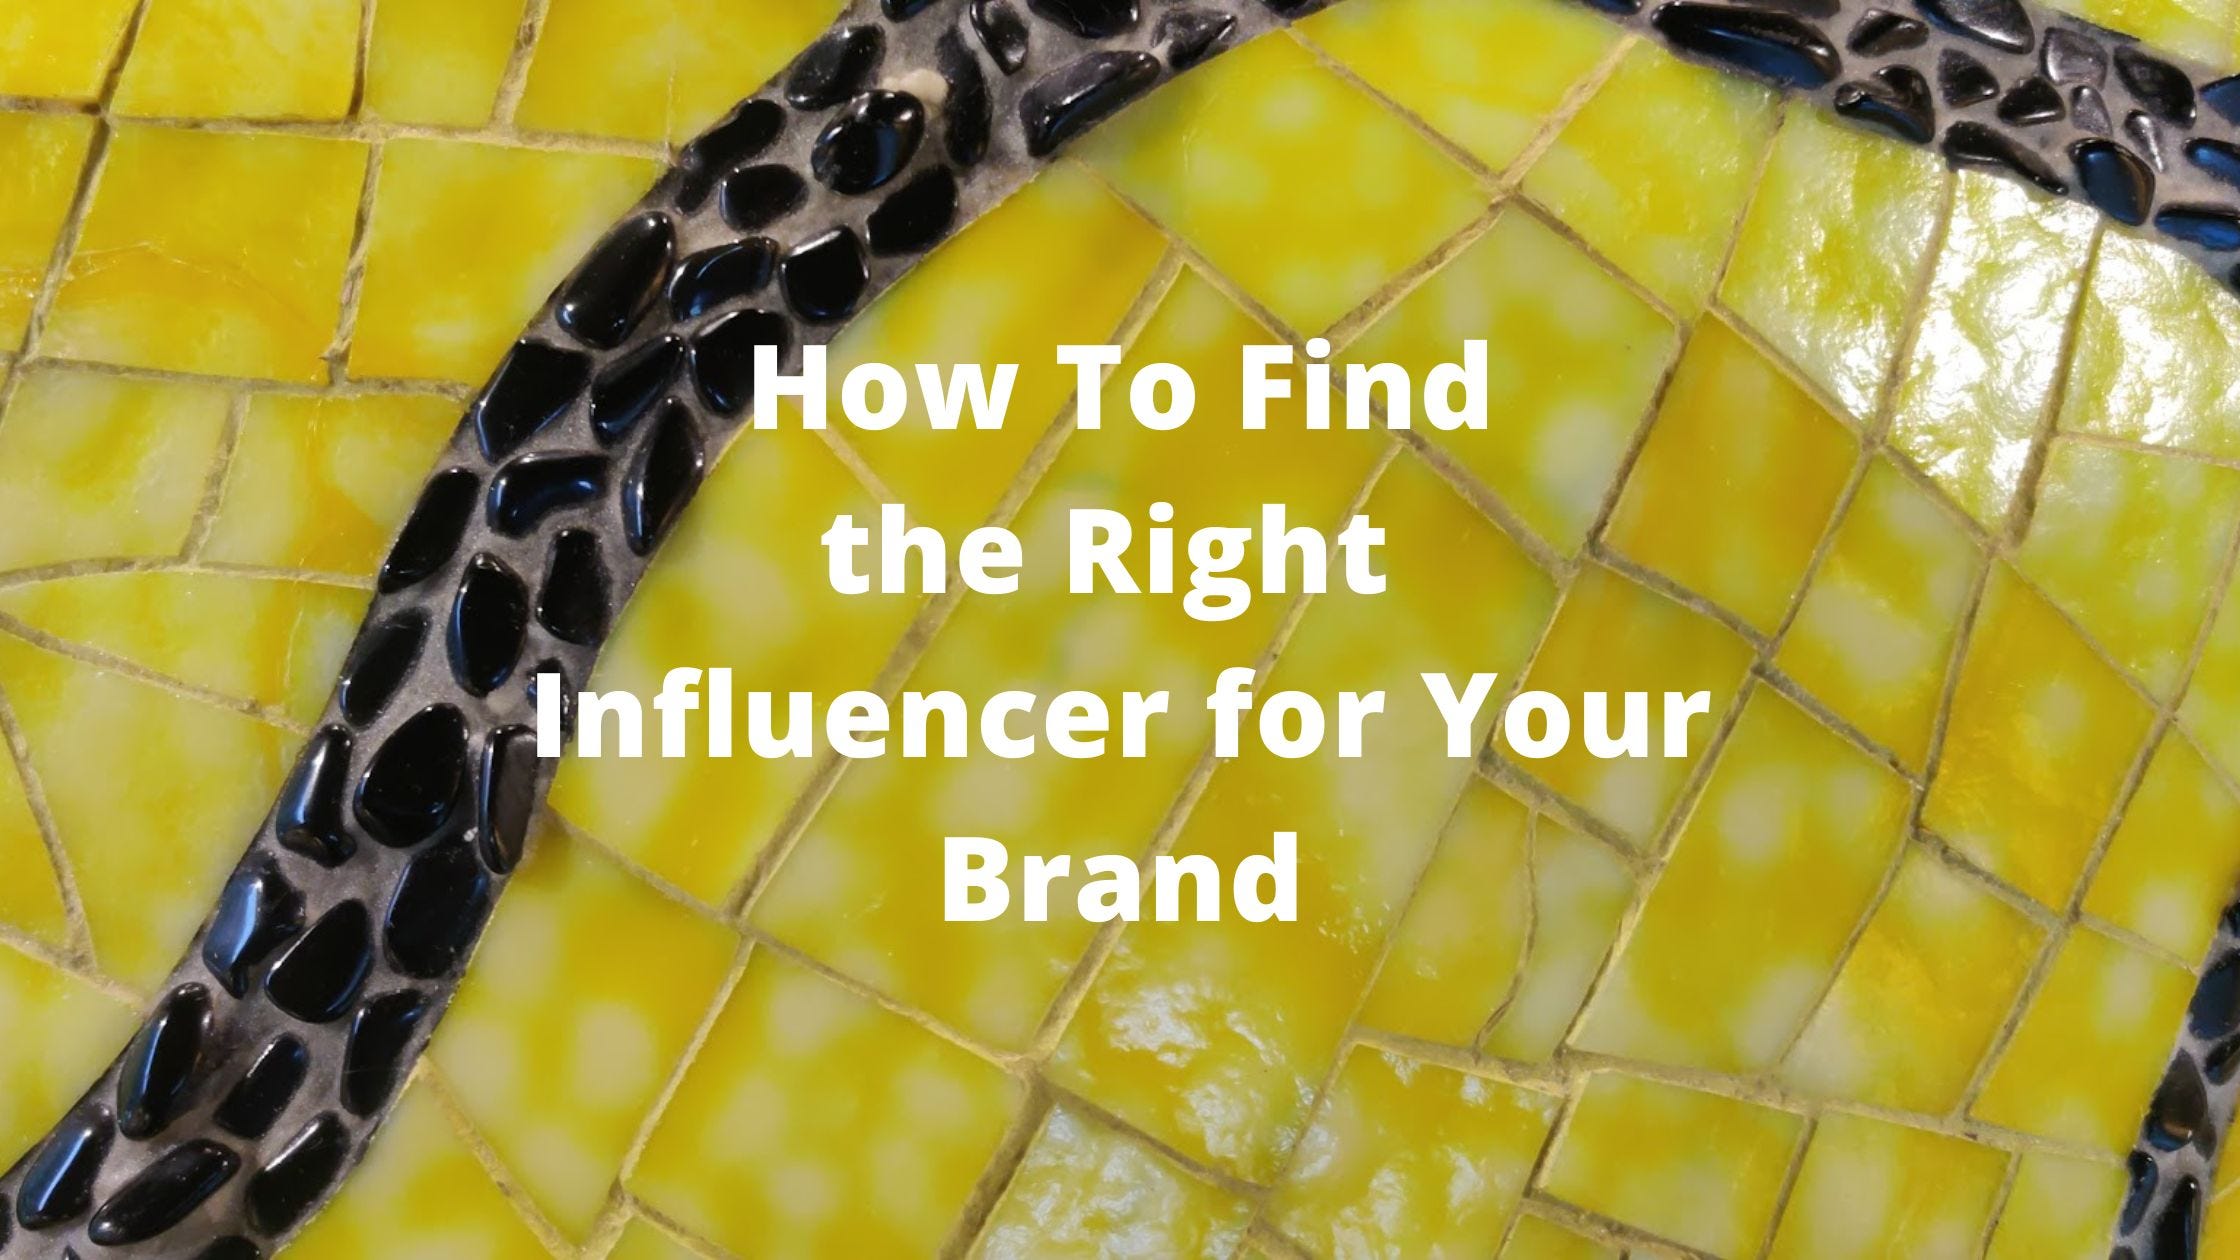 Find the Right Influencer for Your Brand